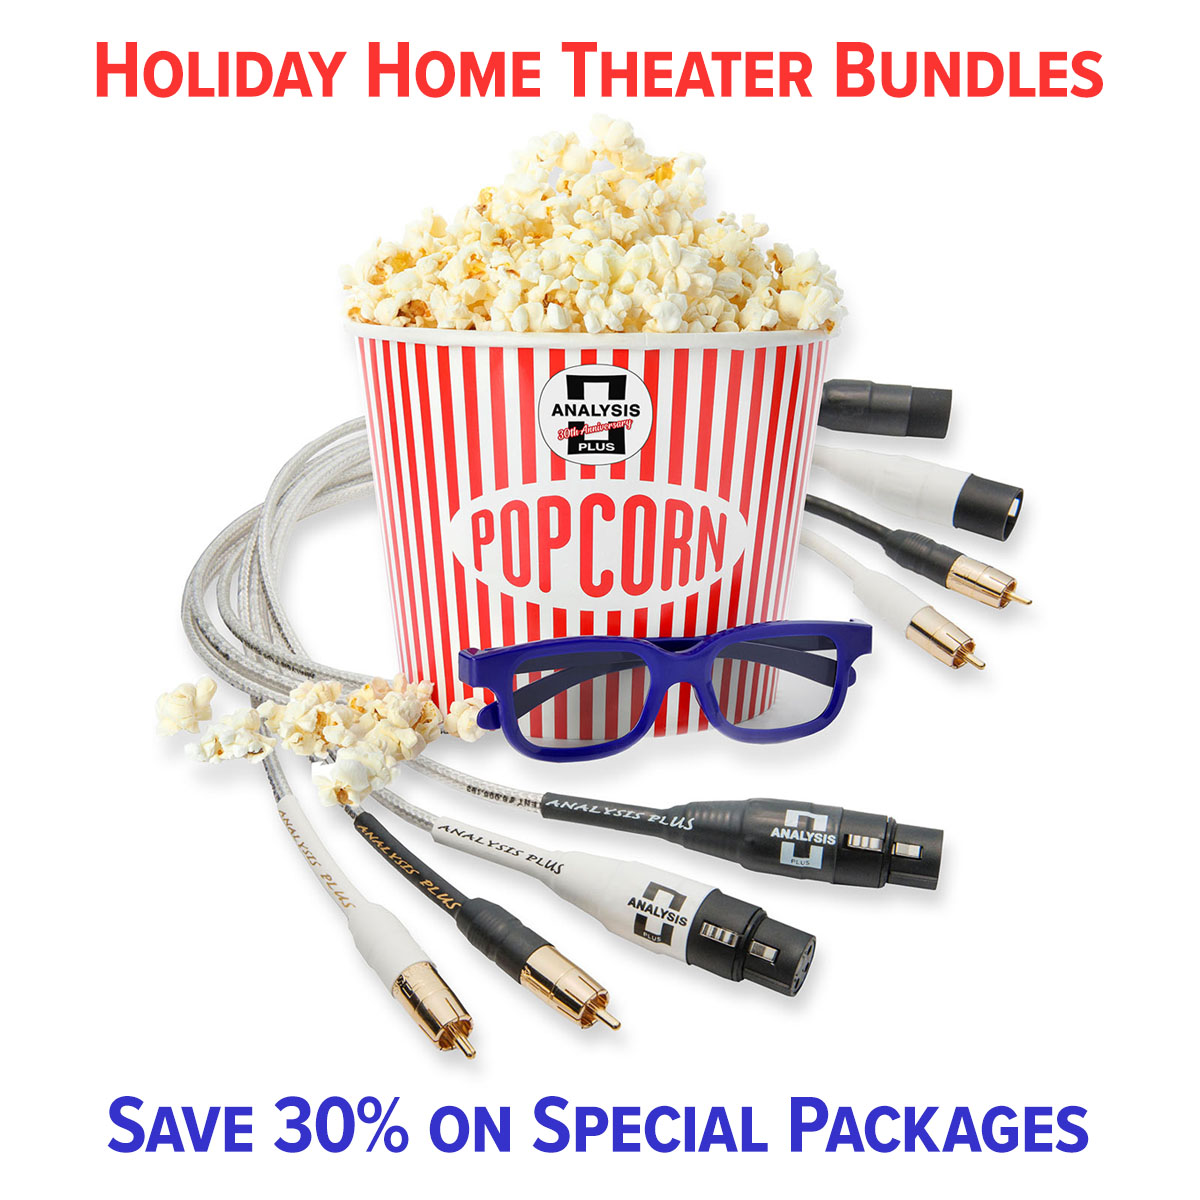 Home Theater Bundles